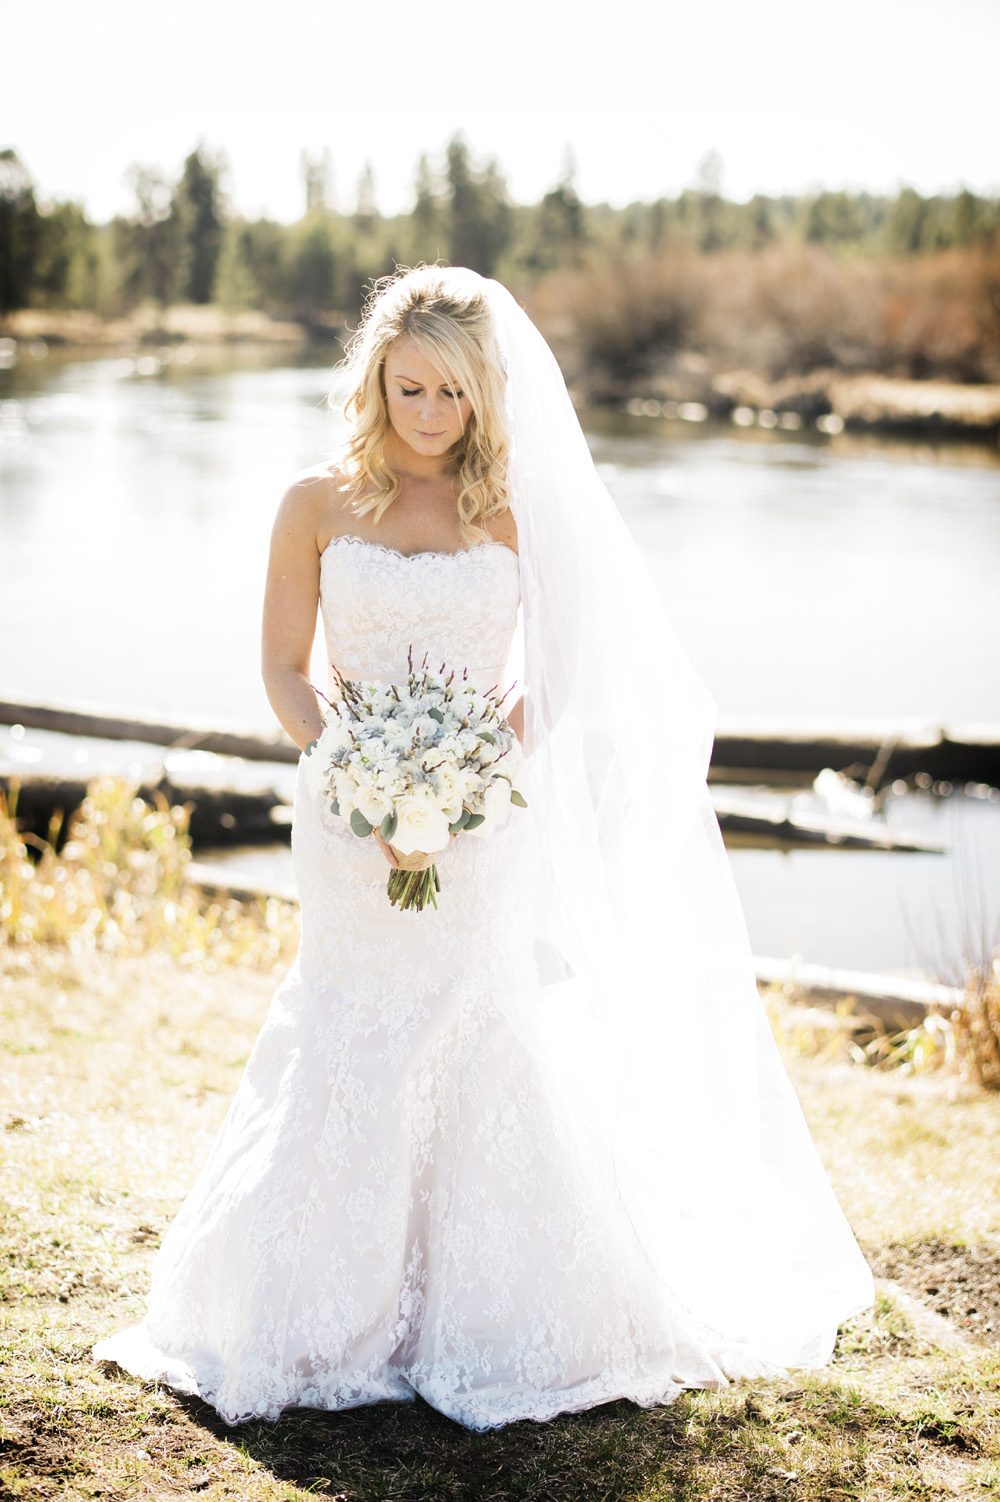 Bridalbliss.com | Portland Wedding | Central Oregon Event Planning and Design | Kimberly Kay Photography | Zest Floral 